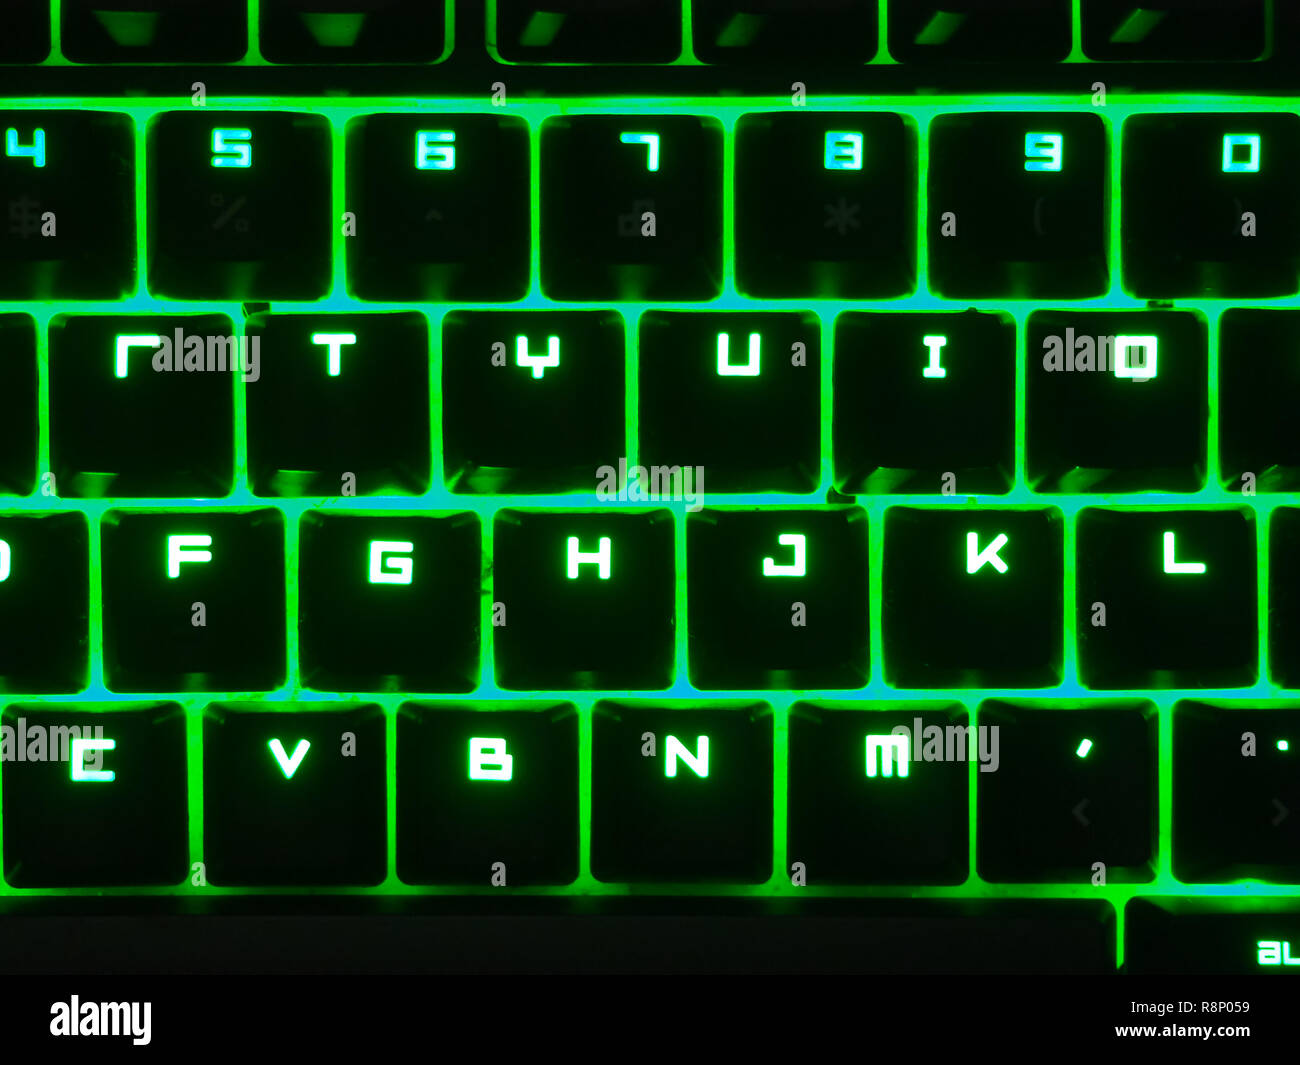 Black keyboard with green led. Colorful keyboard for gaming. Backlit  keyboard with versatile color schemes. Colorful light keyboard Stock Photo  - Alamy